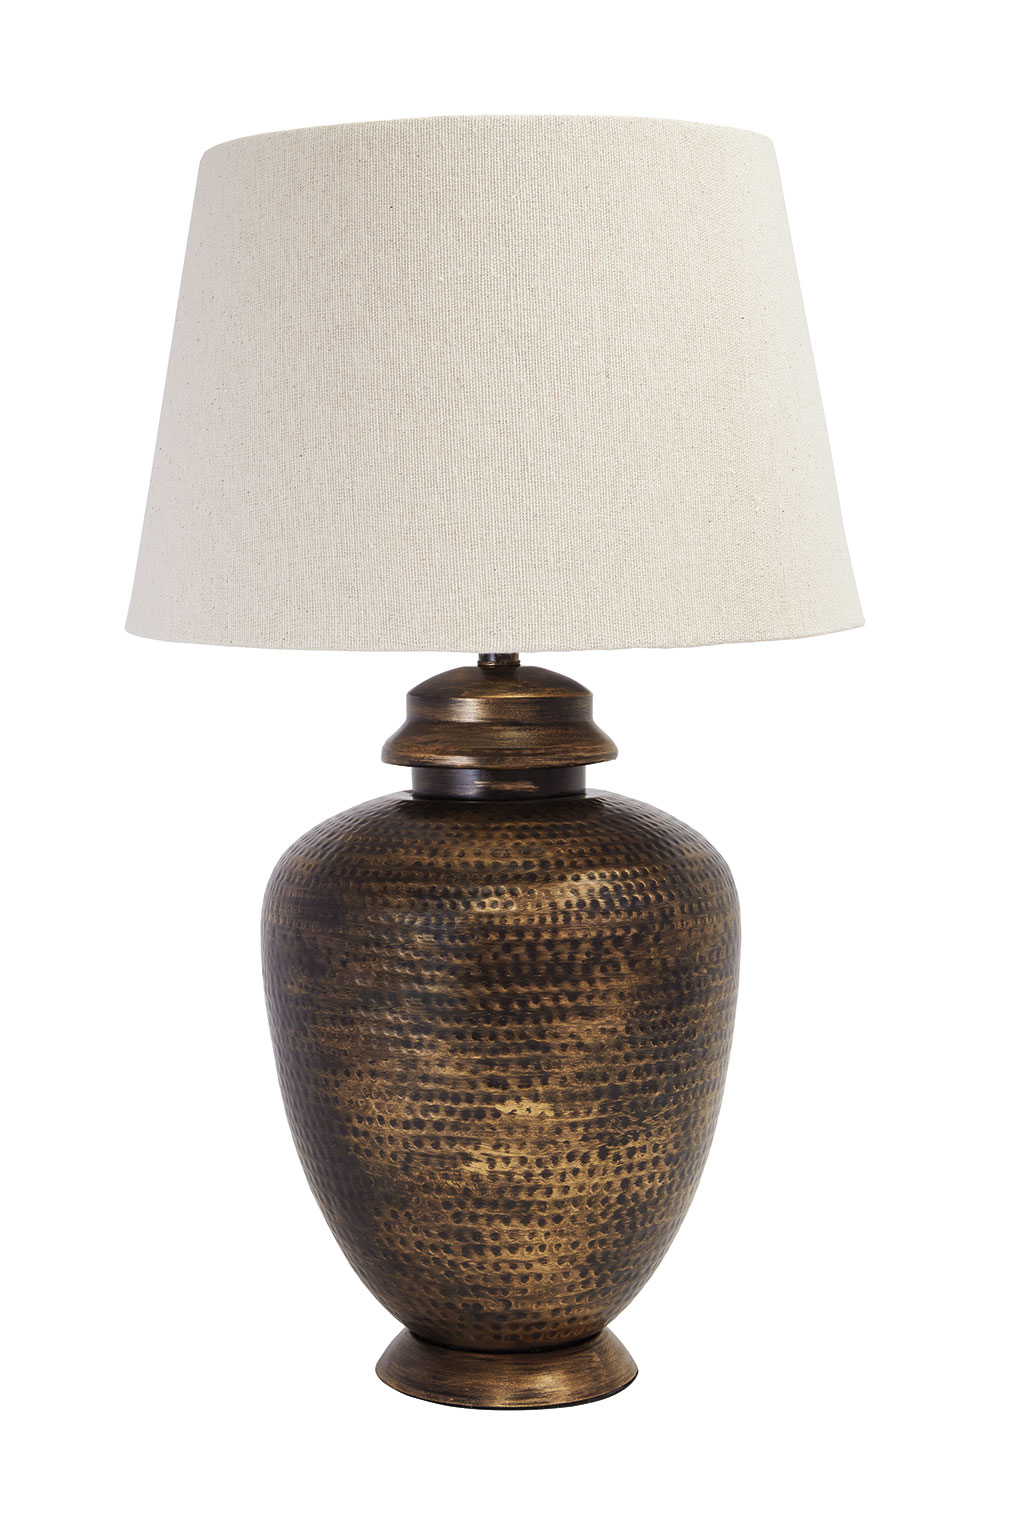 L207874 Table Lamp - Antique Brass Finish